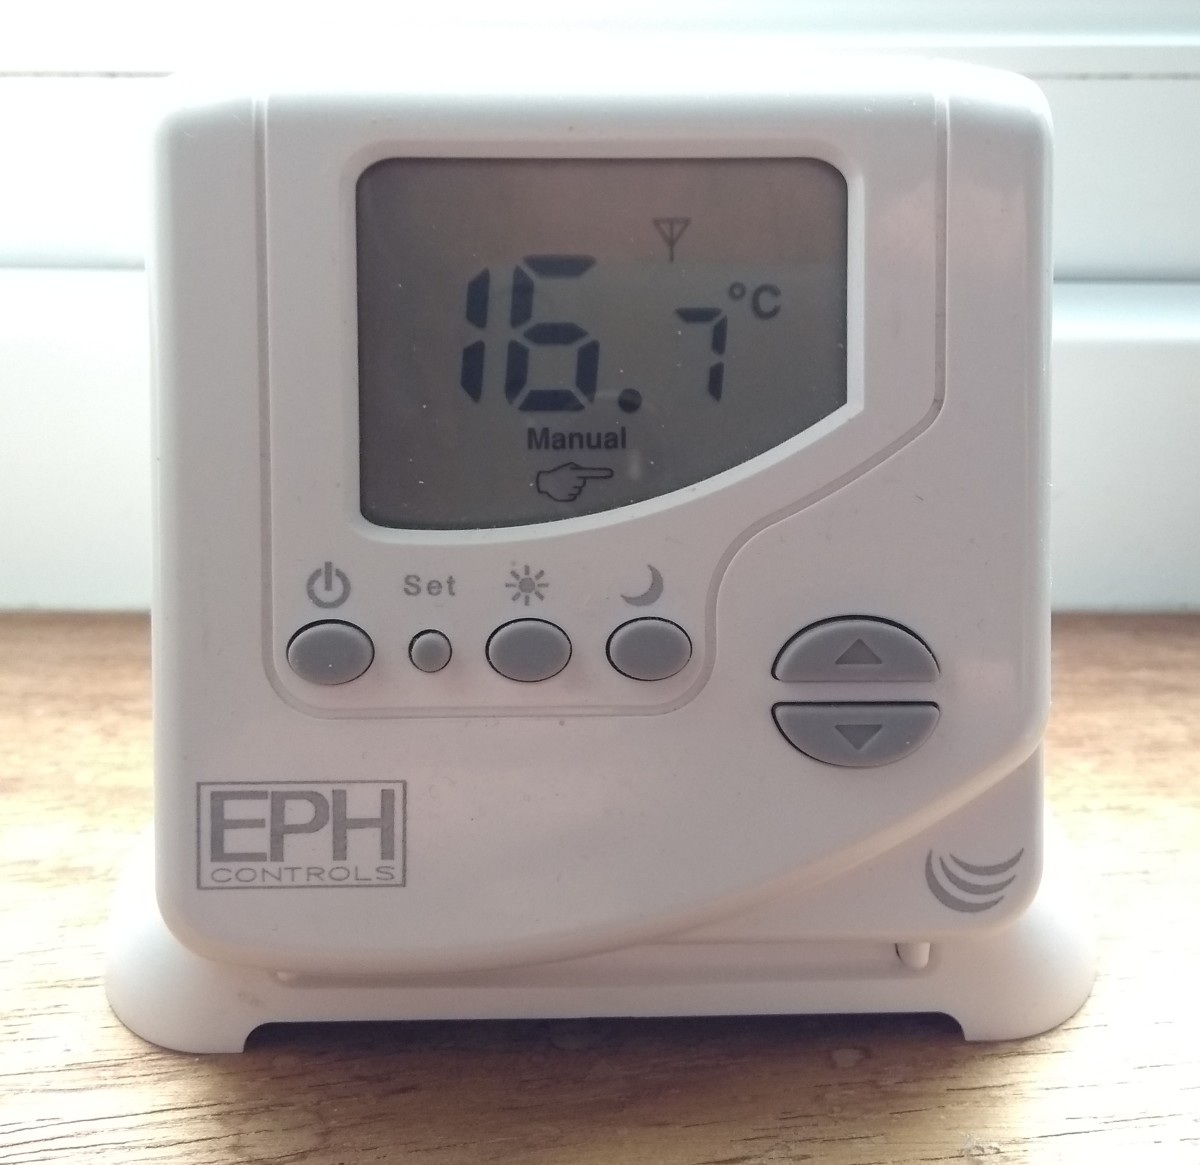 Turn down your room thermostat.